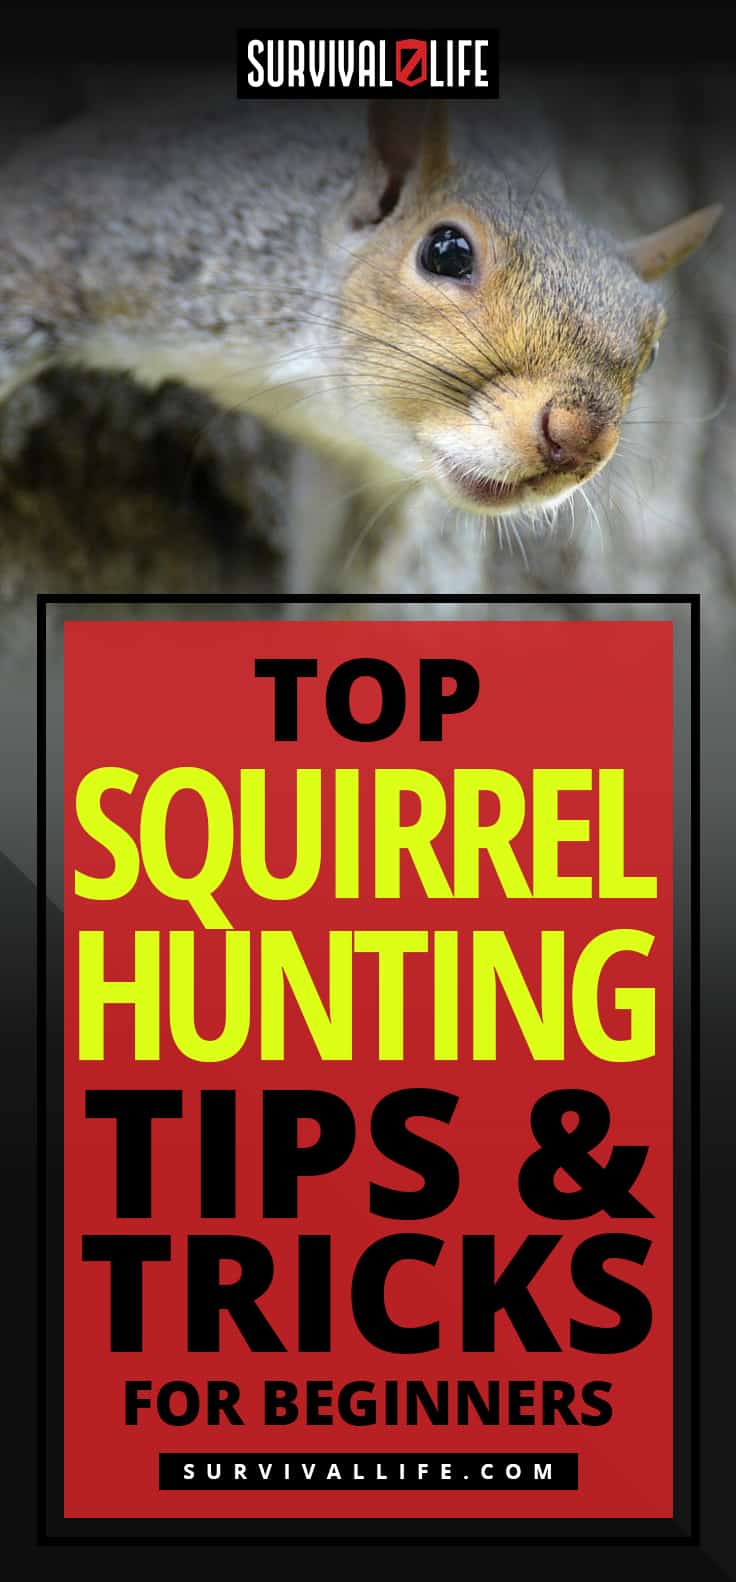 Top Squirrel Hunting Tips And Tricks For Beginners | https://survivallife.com/tips-squirrel-hunting/